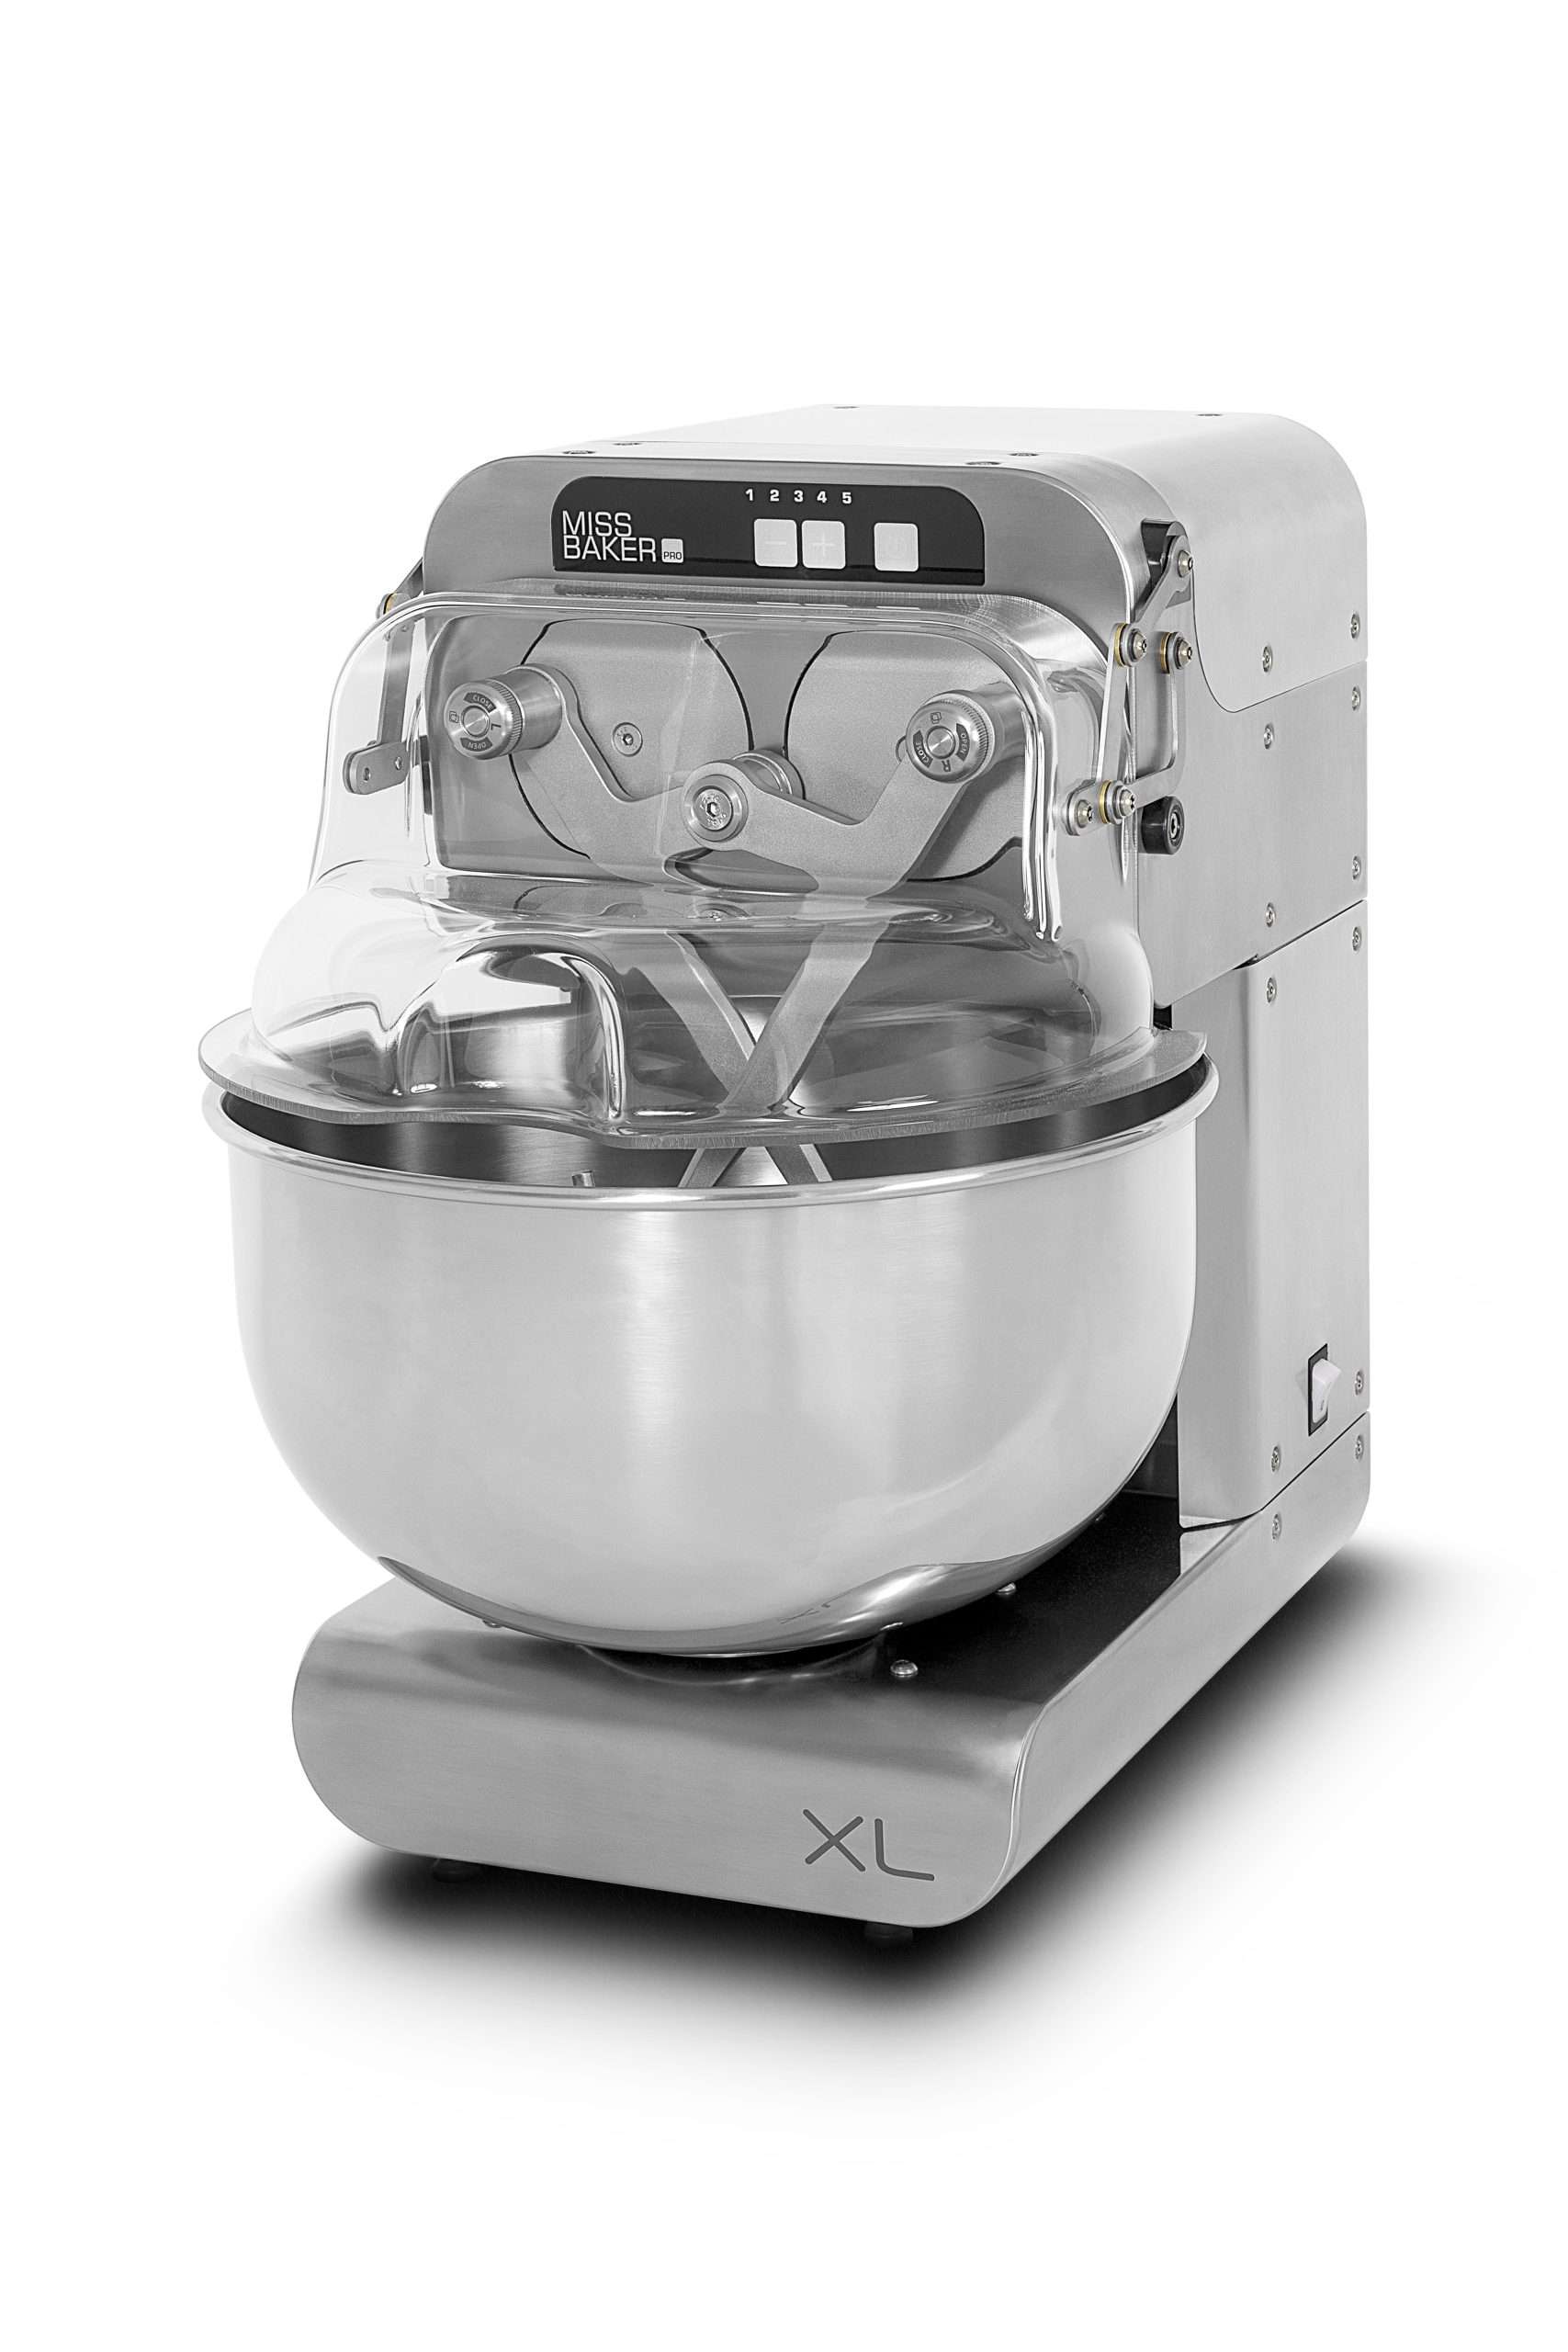 Miss Baker Pro XL – 9 kg finished /20 Litre Double Arm Mixer, 5 speed, Stainless steel (INOX)